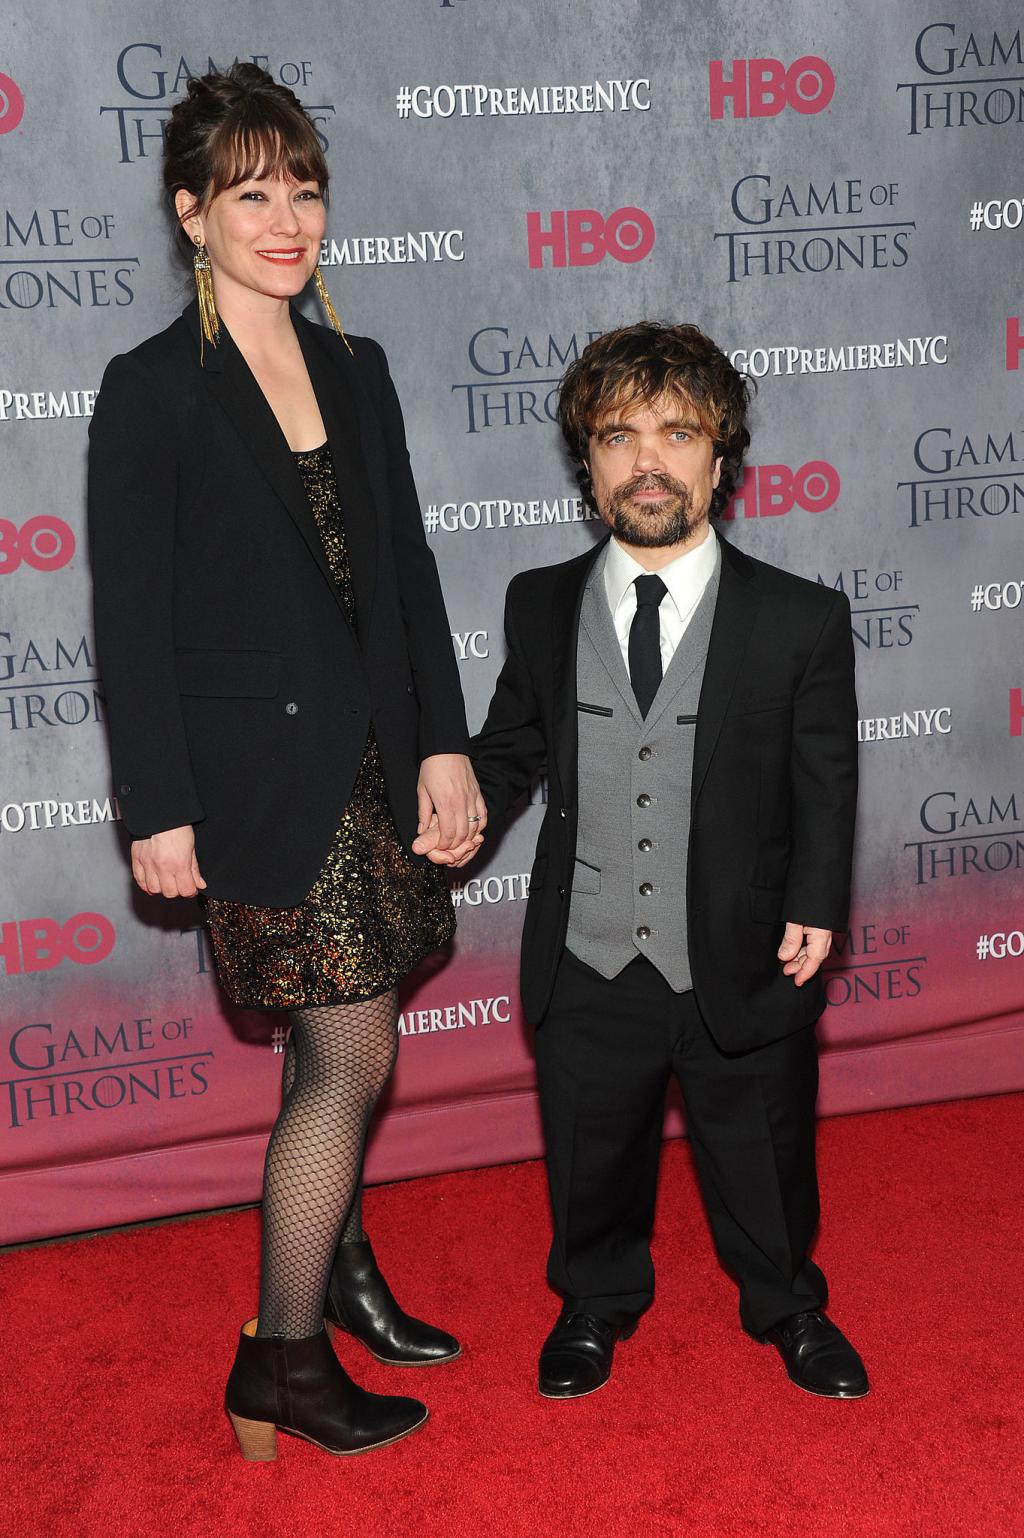 Erica Schmidt And Peter Dinklage   Must-See Pictures From